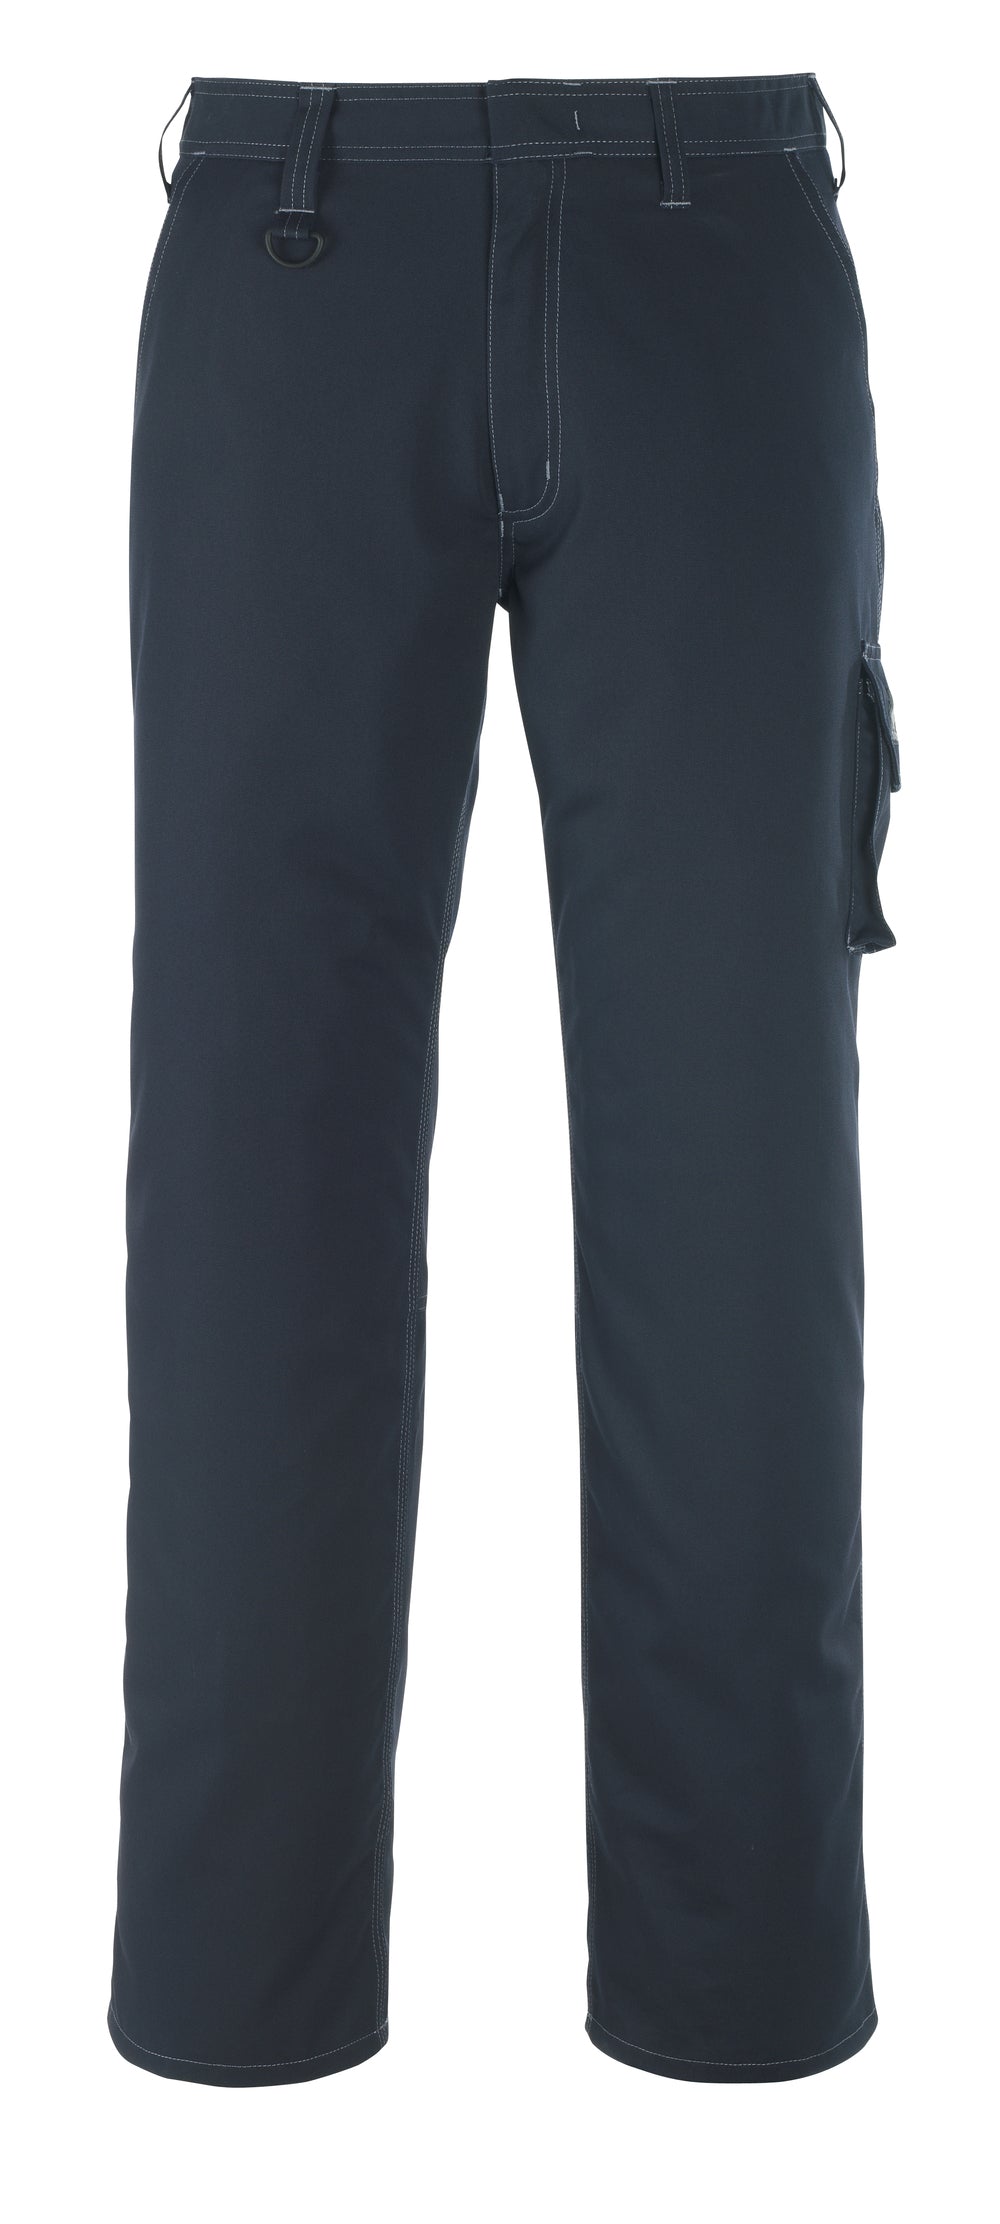 MASCOT®INDUSTRY Trousers with thigh pockets Berkeley 13579 - DaltonSafety